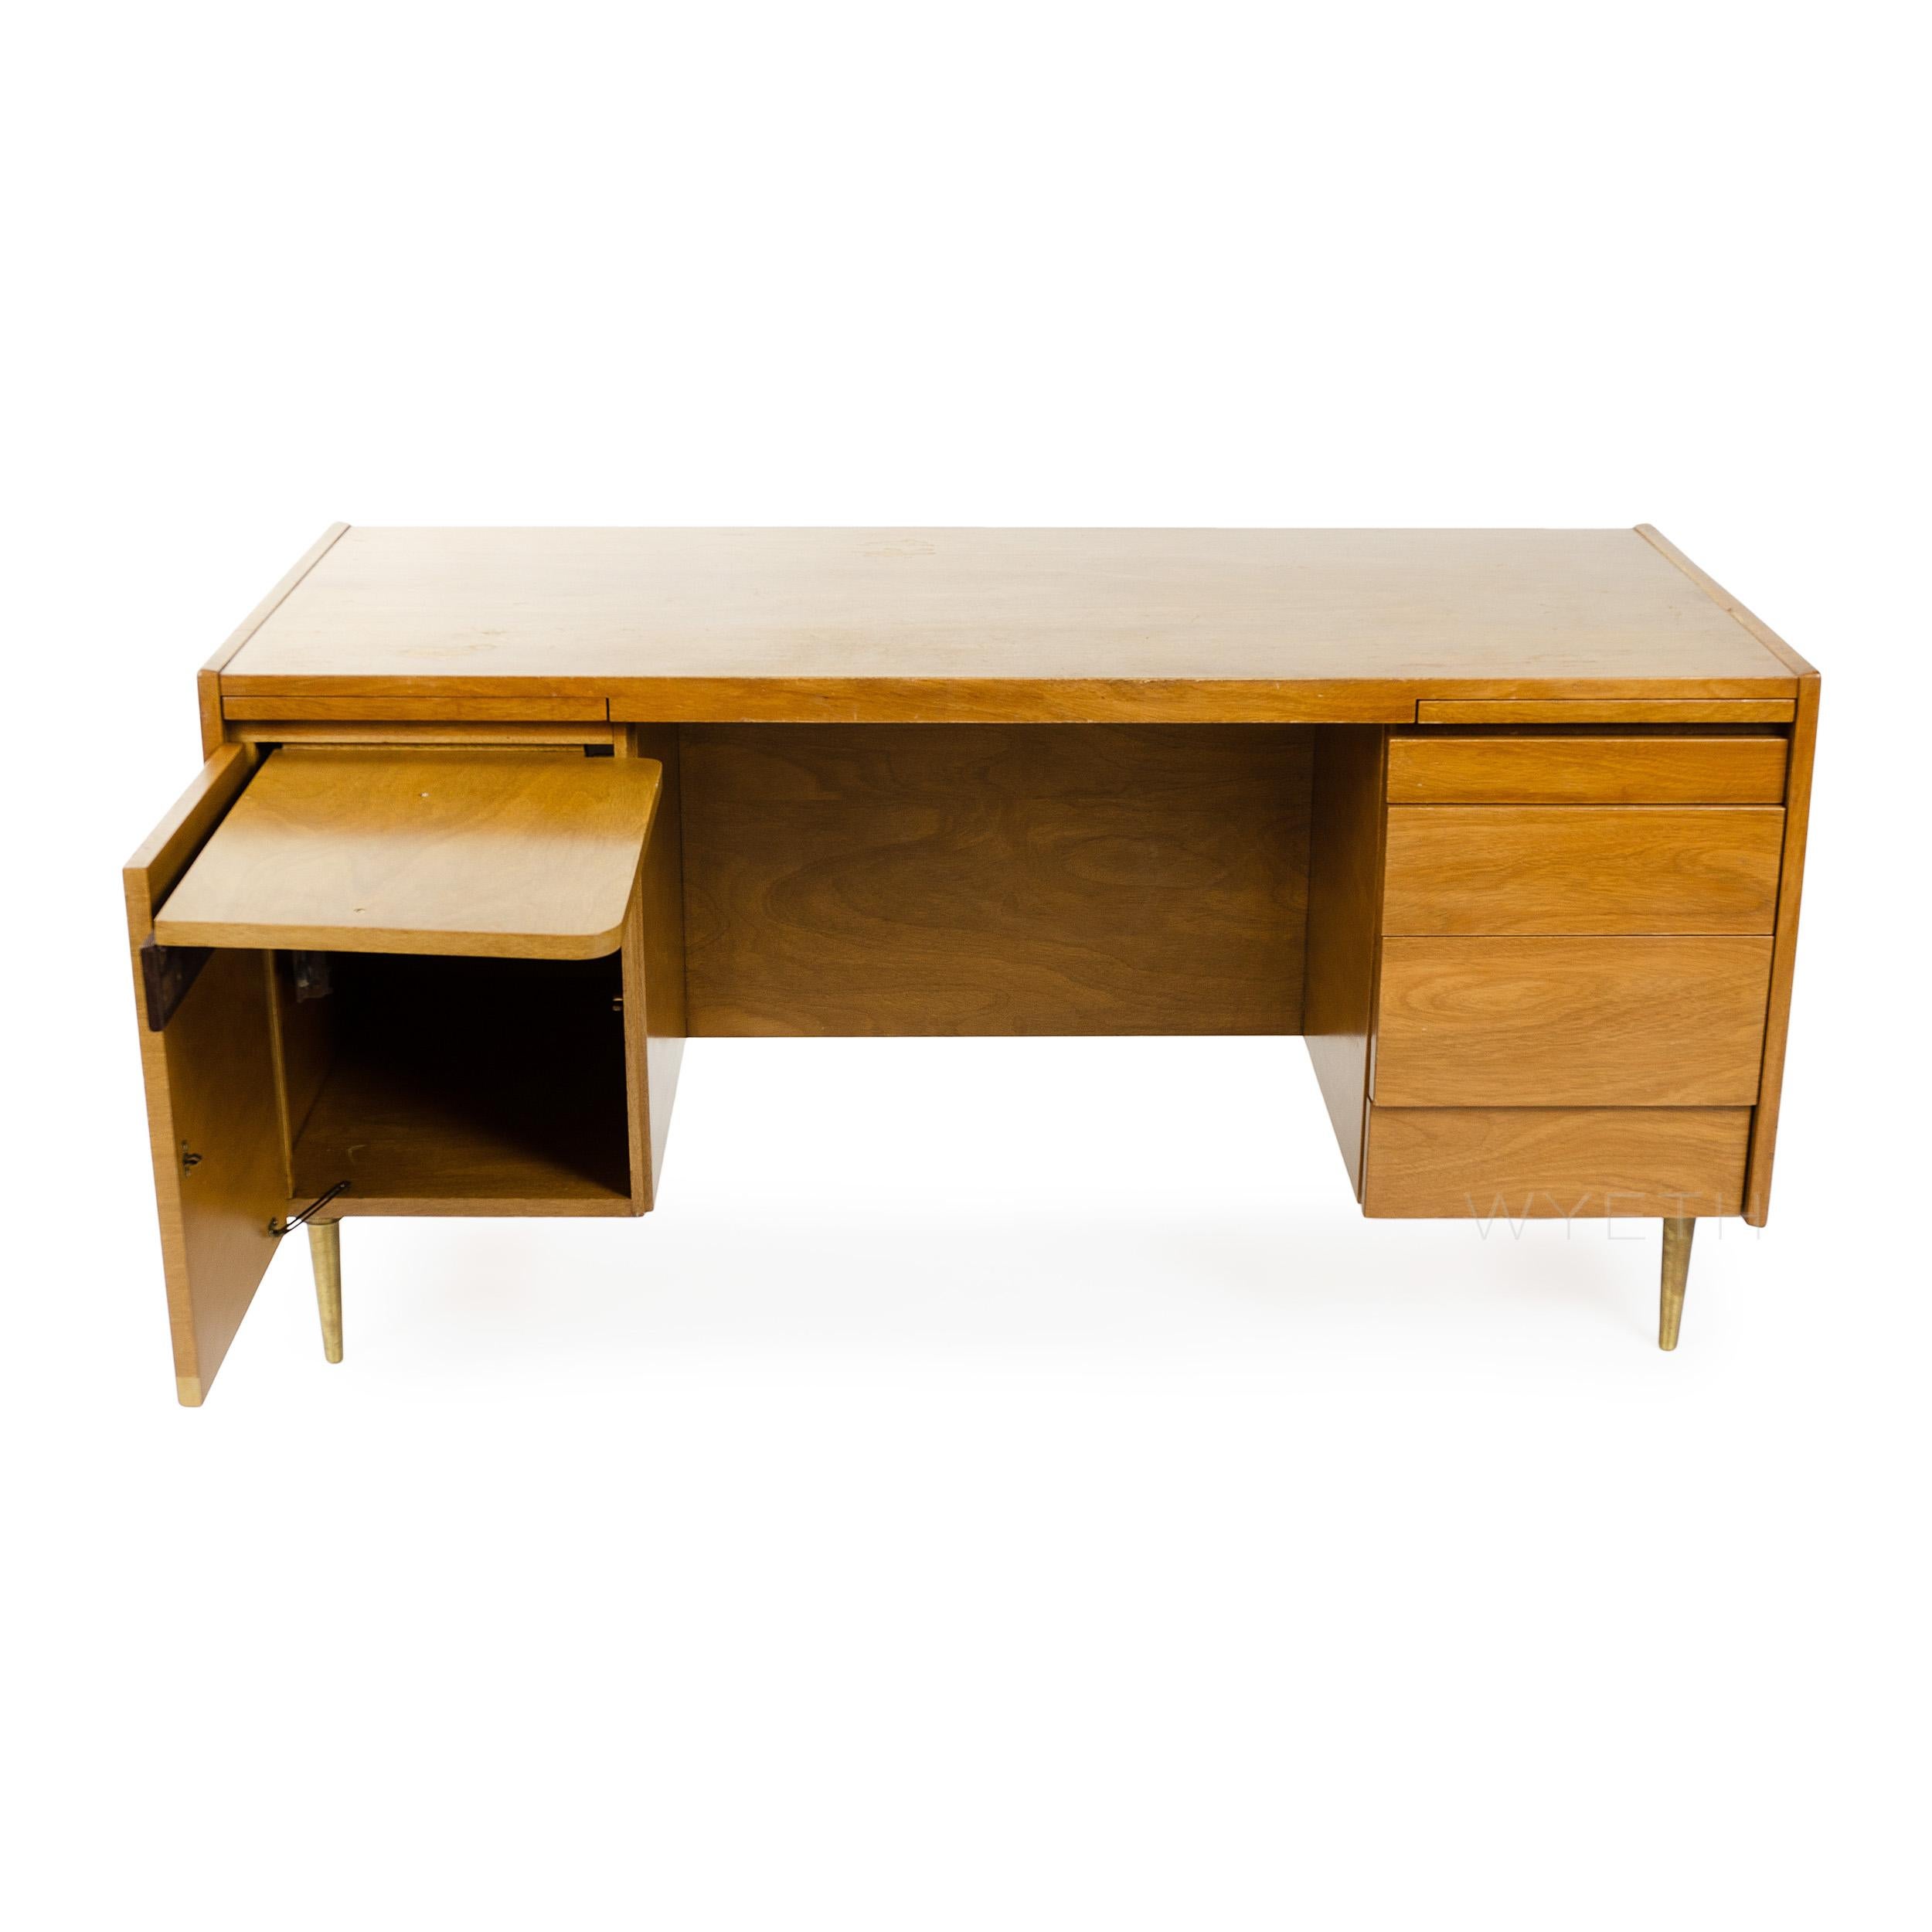 An elegant and finely proportioned bleached walnut double pedestal desk with ample storage floating on dowel-shaped brass legs.